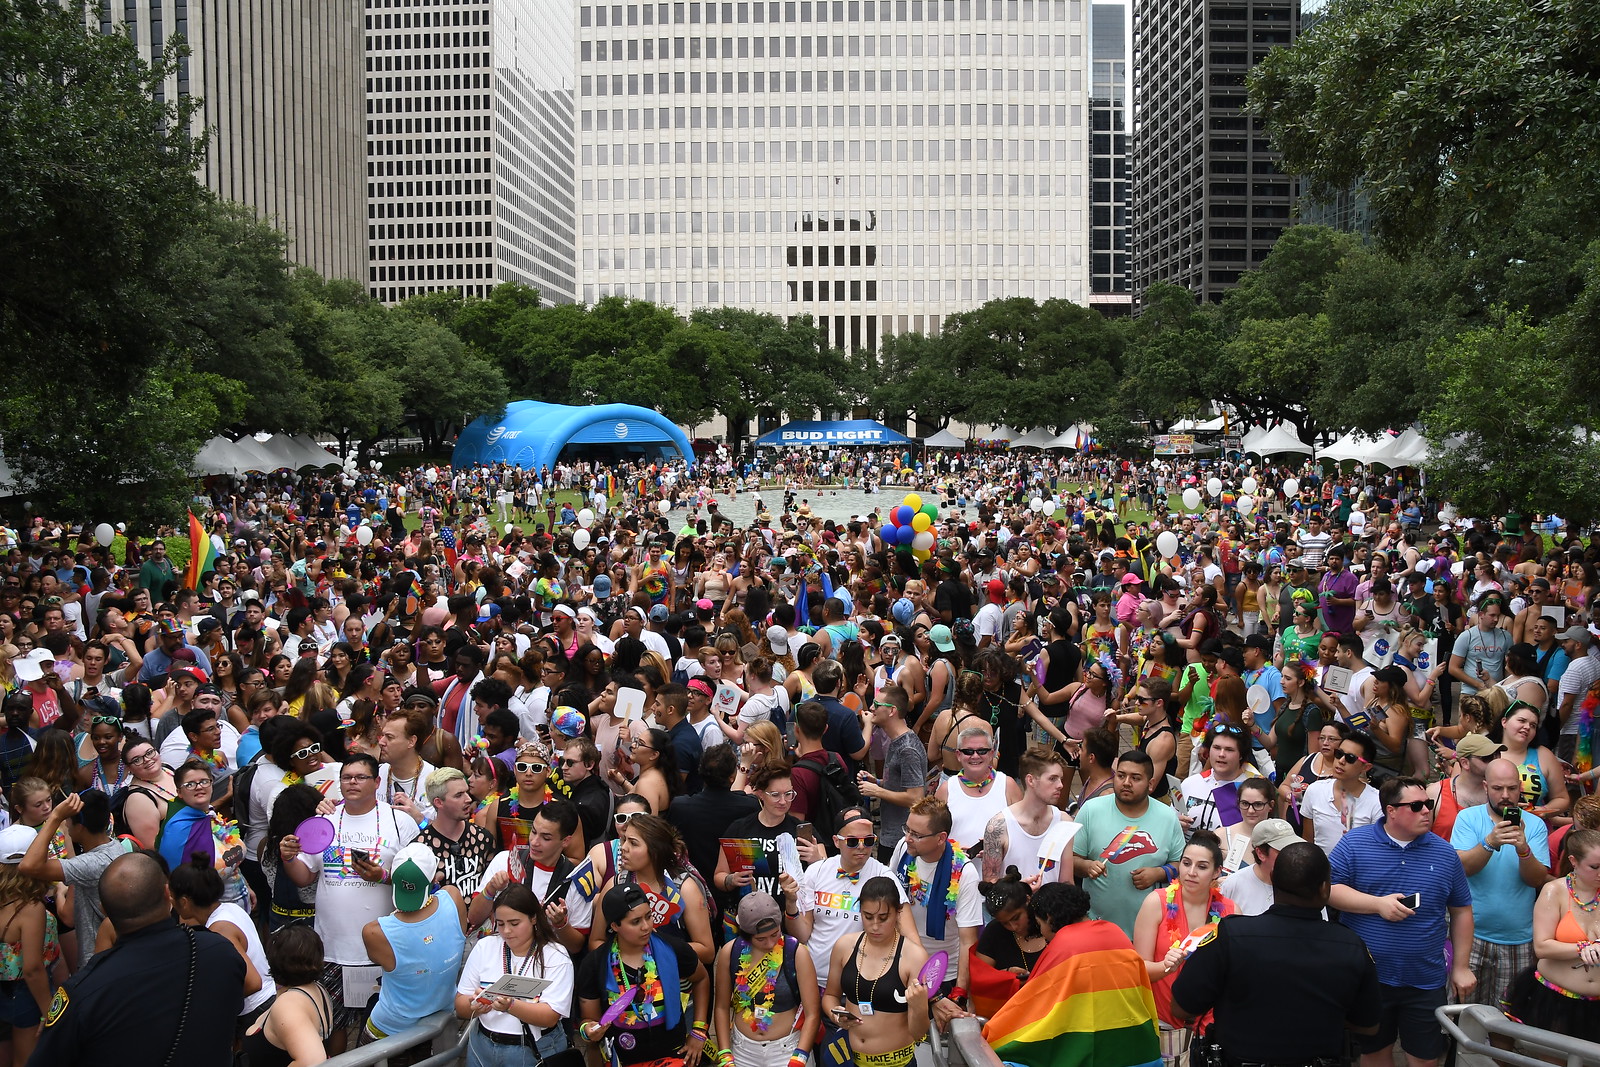 Scenes from the 2017 Houston Pride Festival and Parade OutSmart Magazine